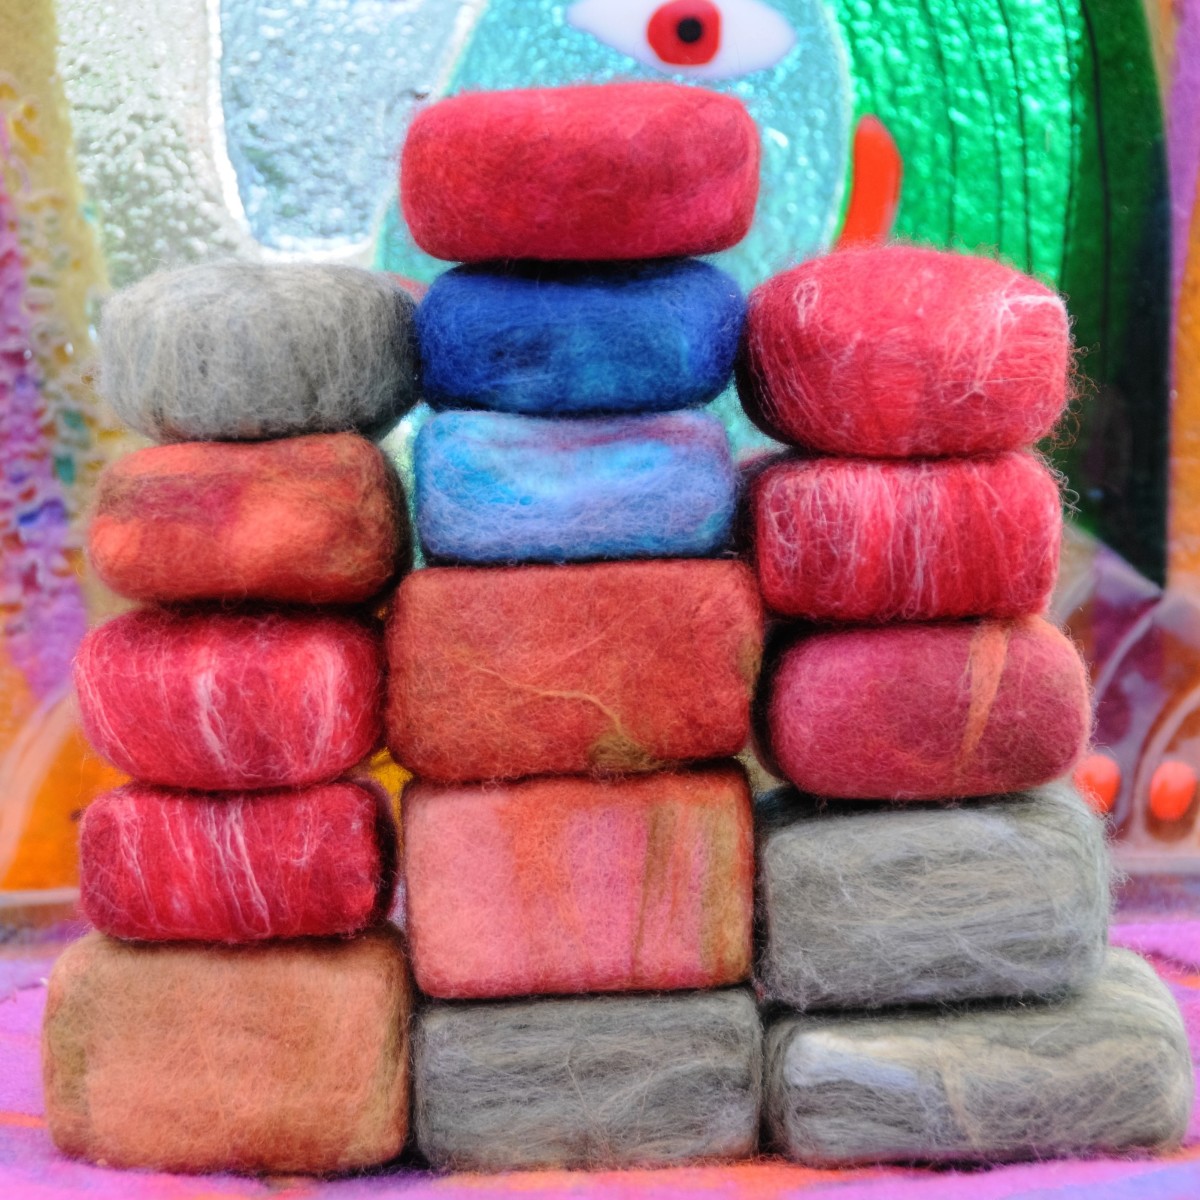 Wet-felted soaps make great gifts for Xmas presents or even at any other time of the year.